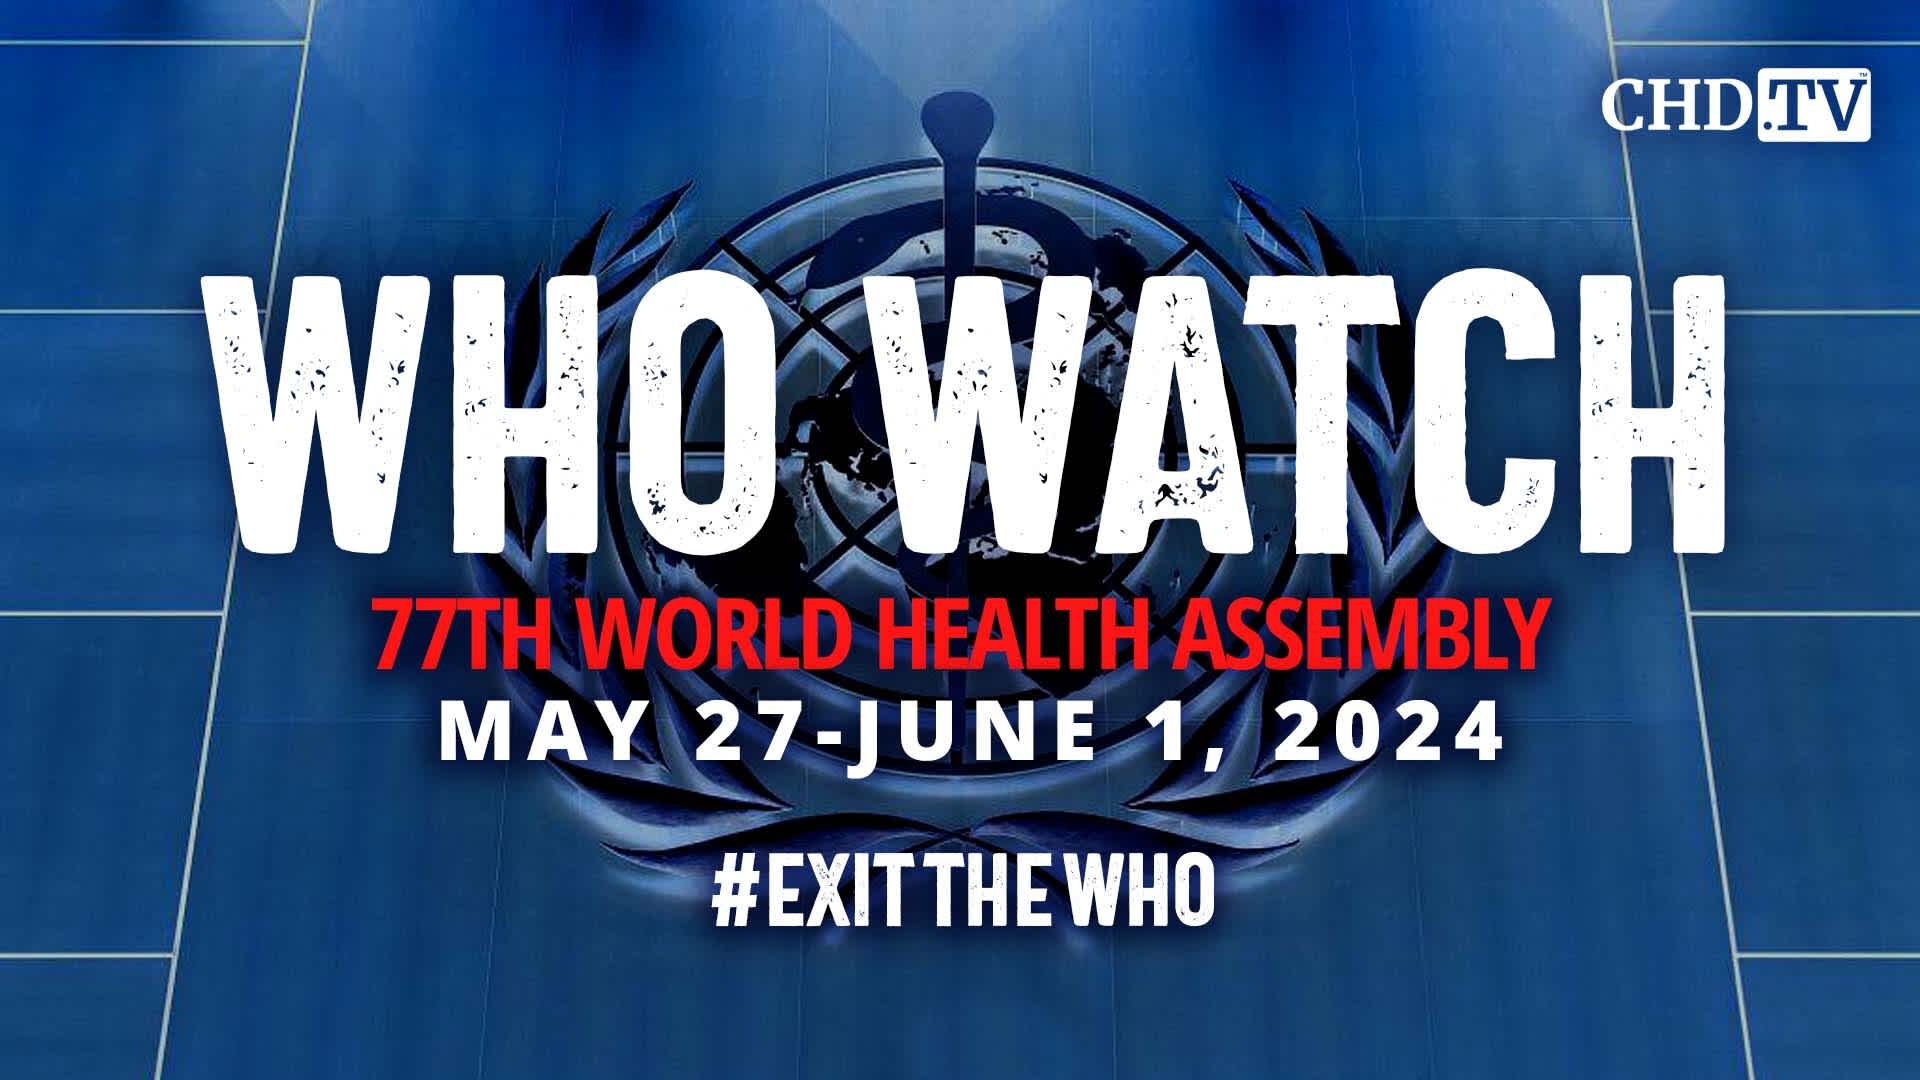 Closing Plenary Meeting With Dr. Tedros | WHA77 | June 1